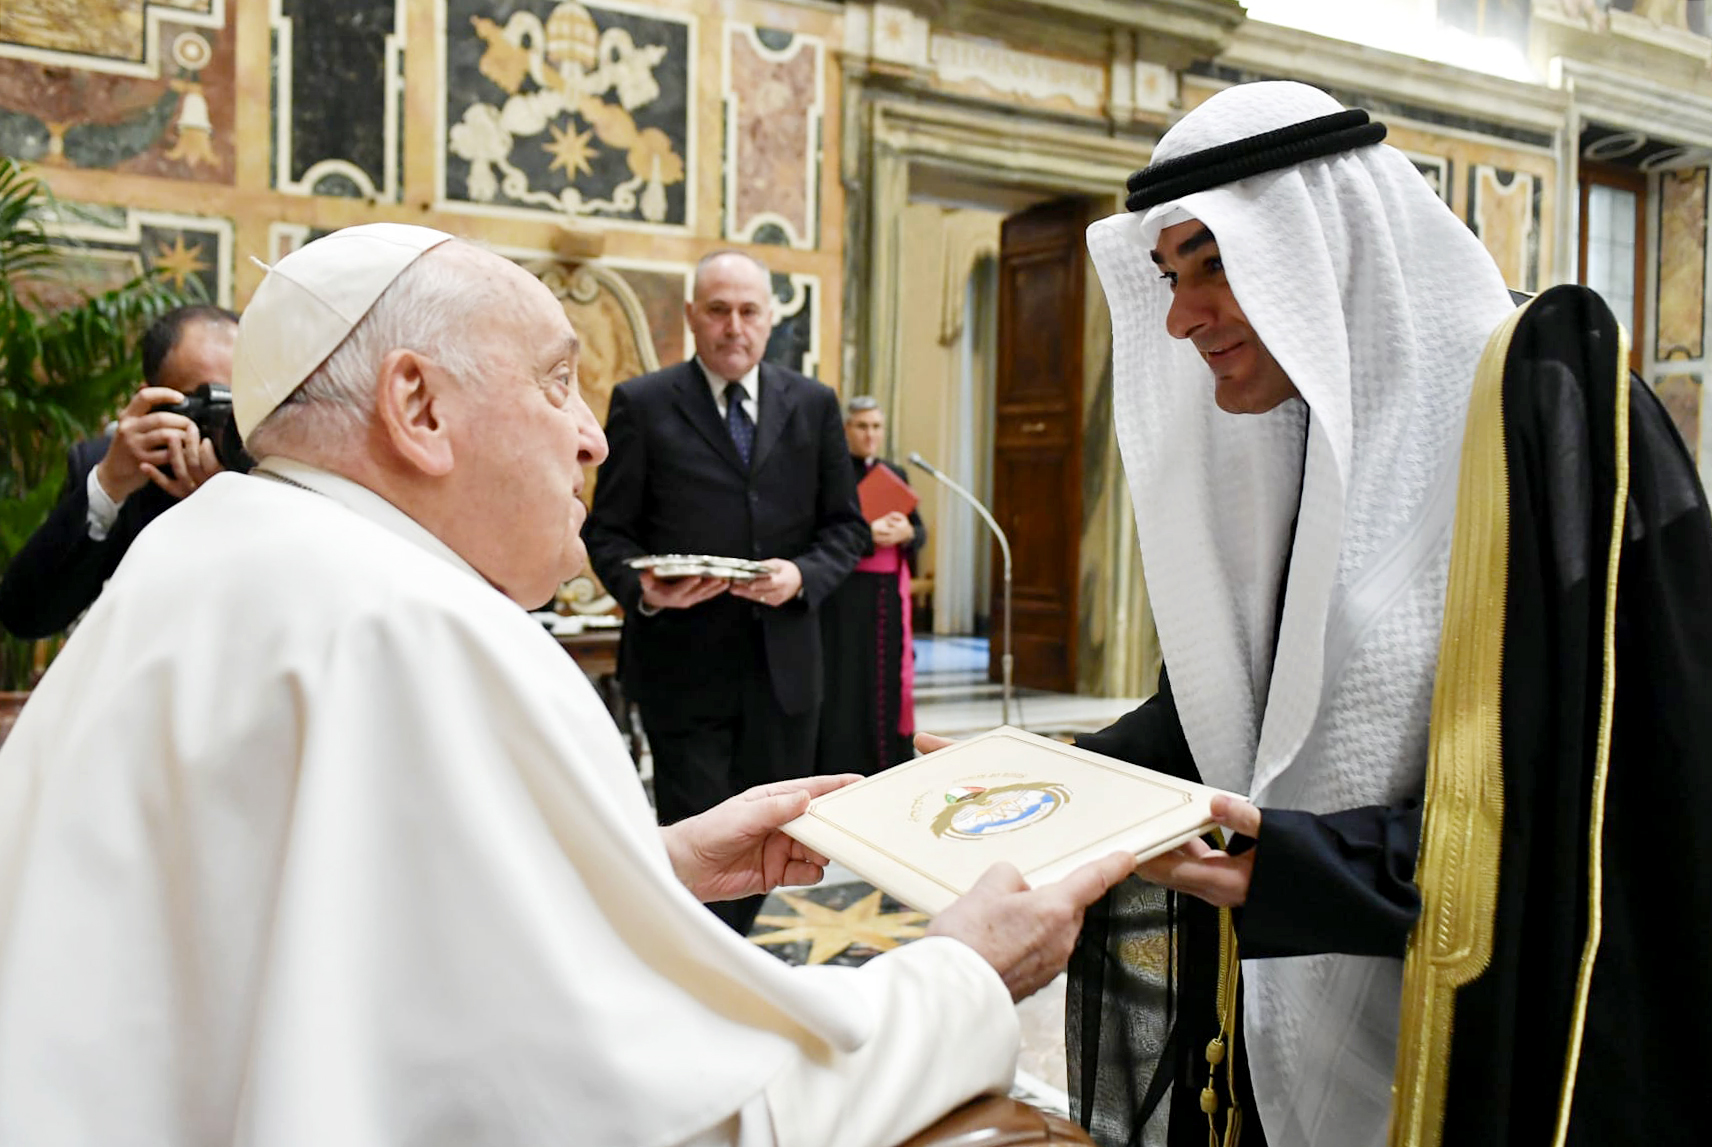 Kuwait's Ambassador Yaqoub Al-Sanad presents his credentials as non-resident envoy to Pope Francis at the Vatican Apostolic Palace